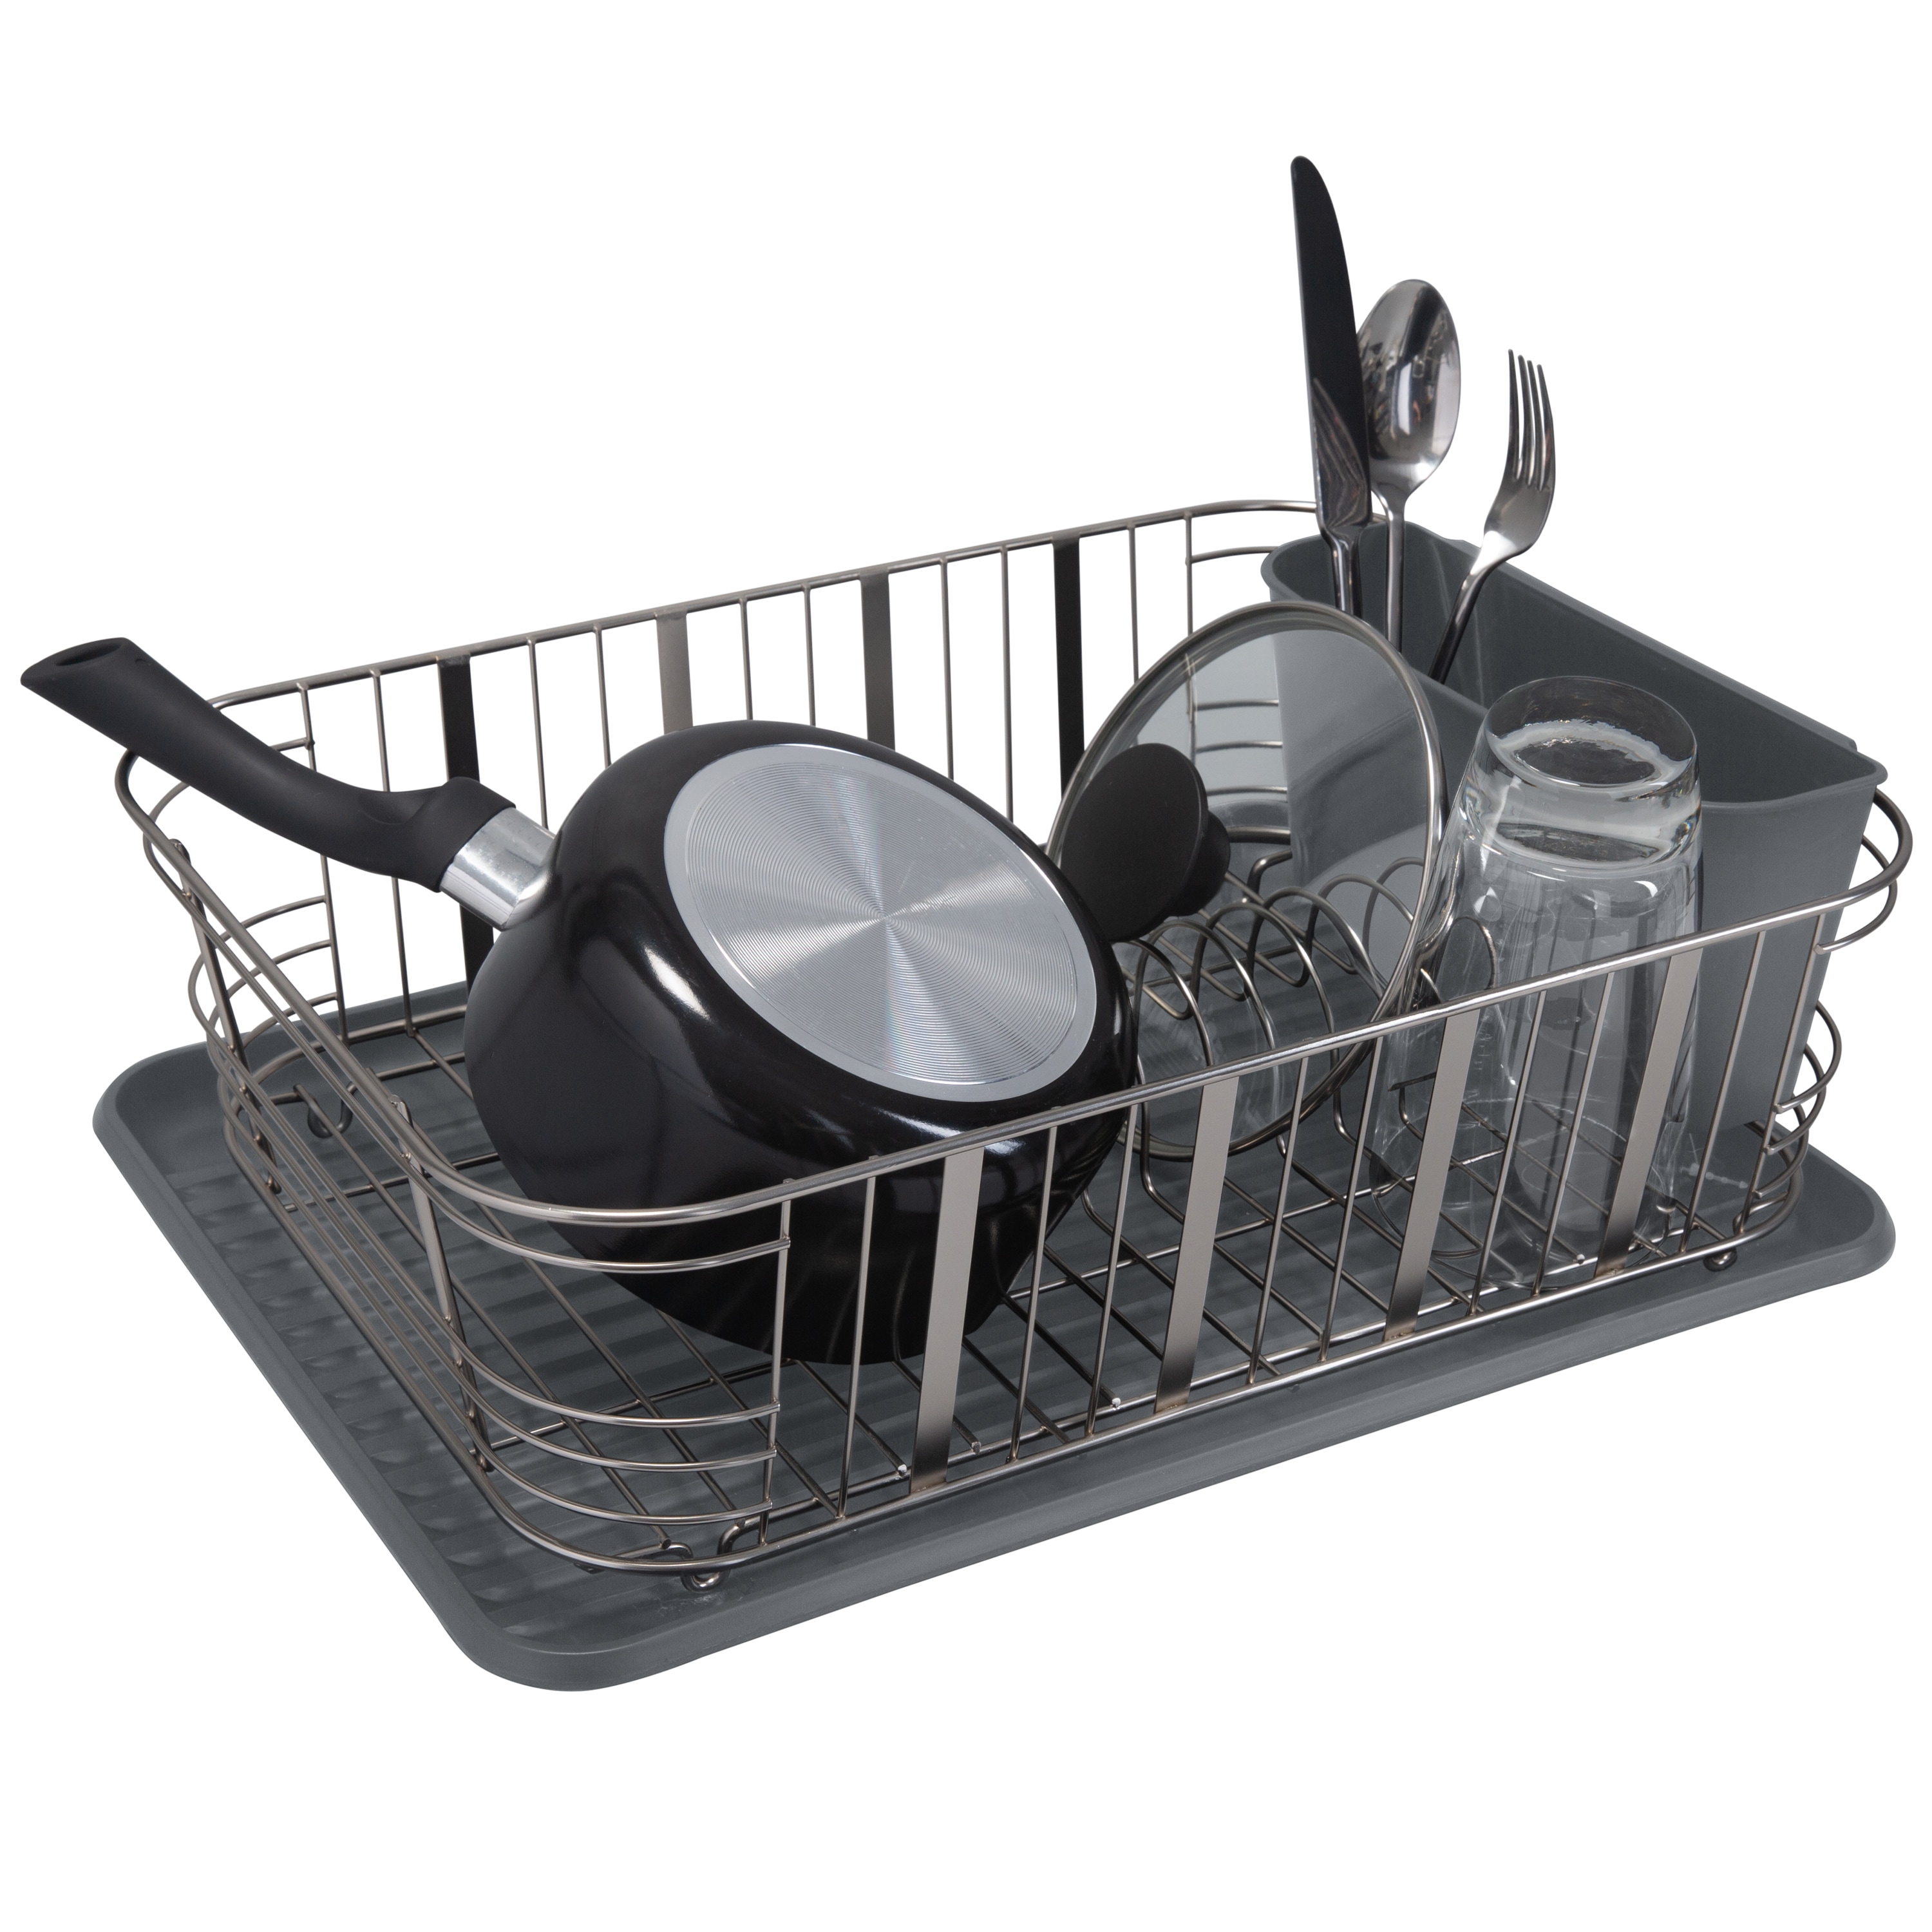 TOOLF Dish Drying Rack, Stainless Steel Dish Rack, Expandable(14.5